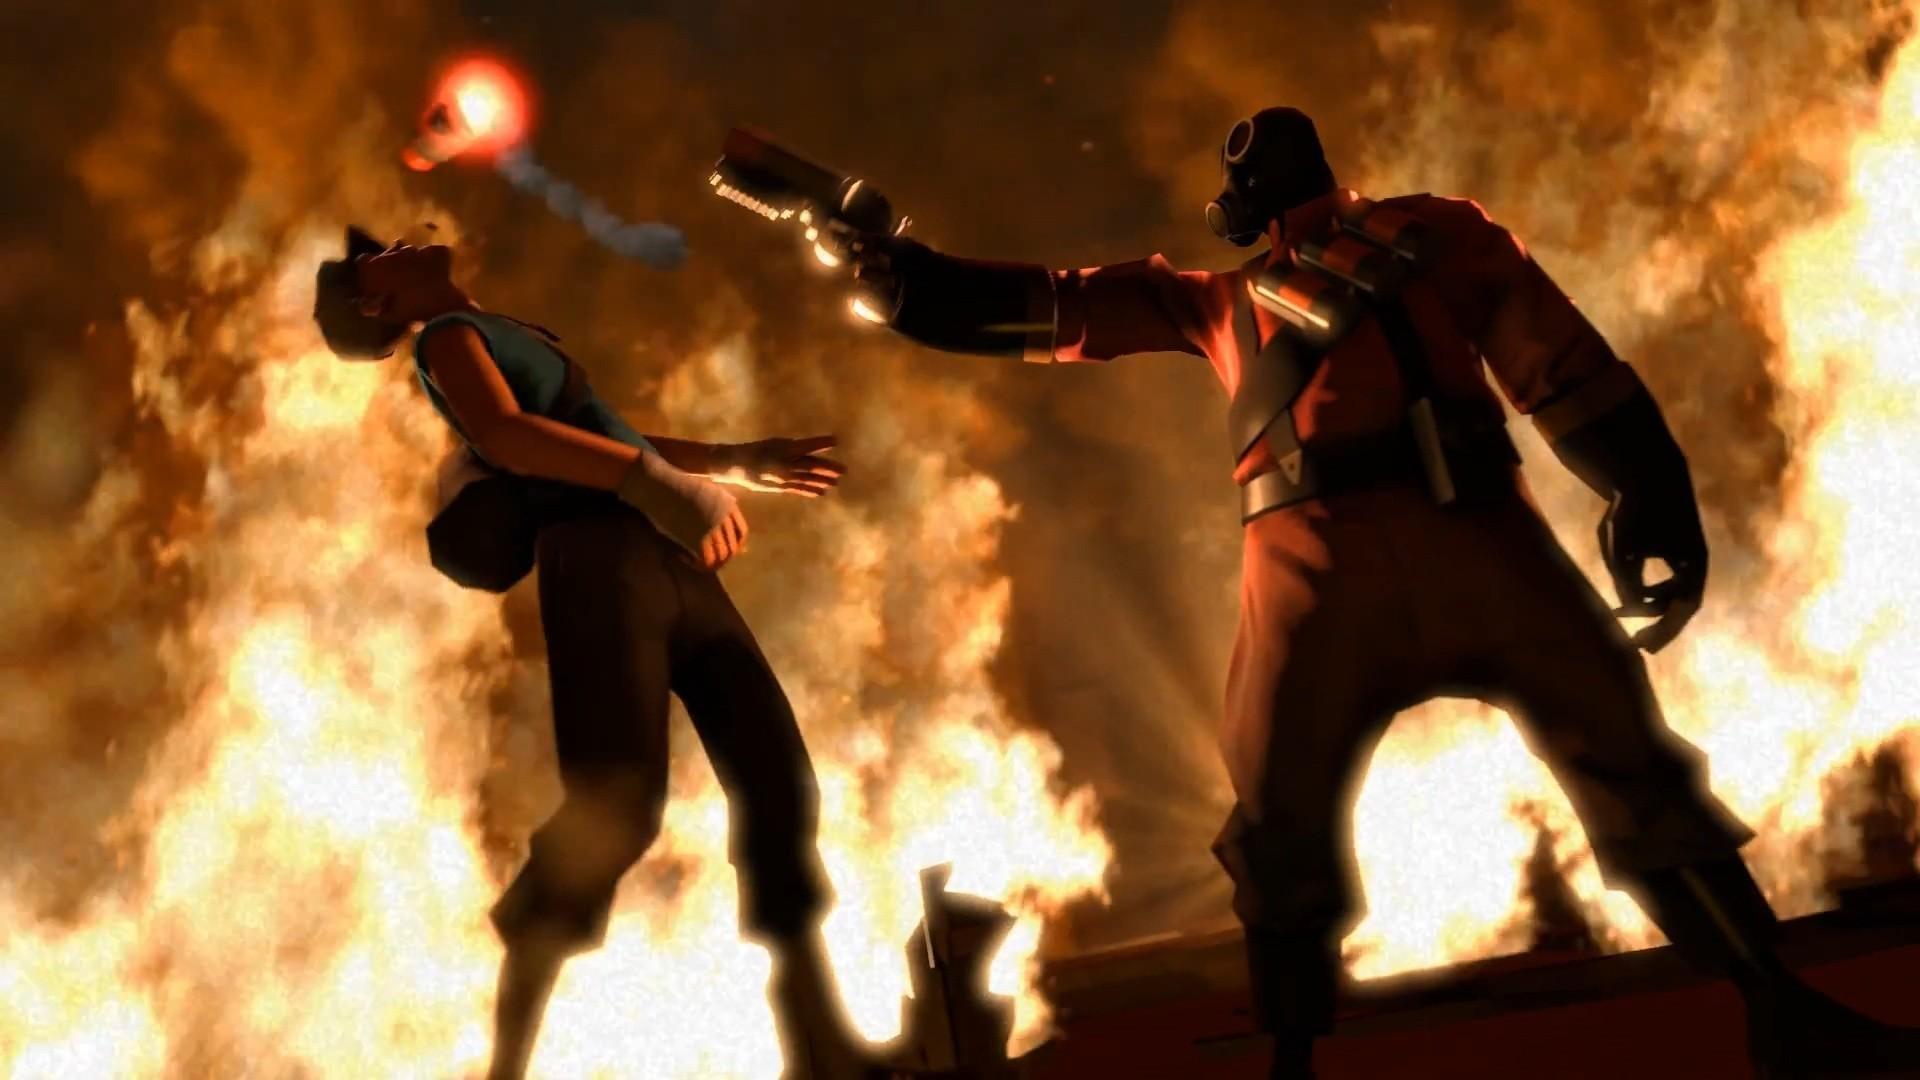 Pyro tf2 scout team fortress 2 meet the wallpaper